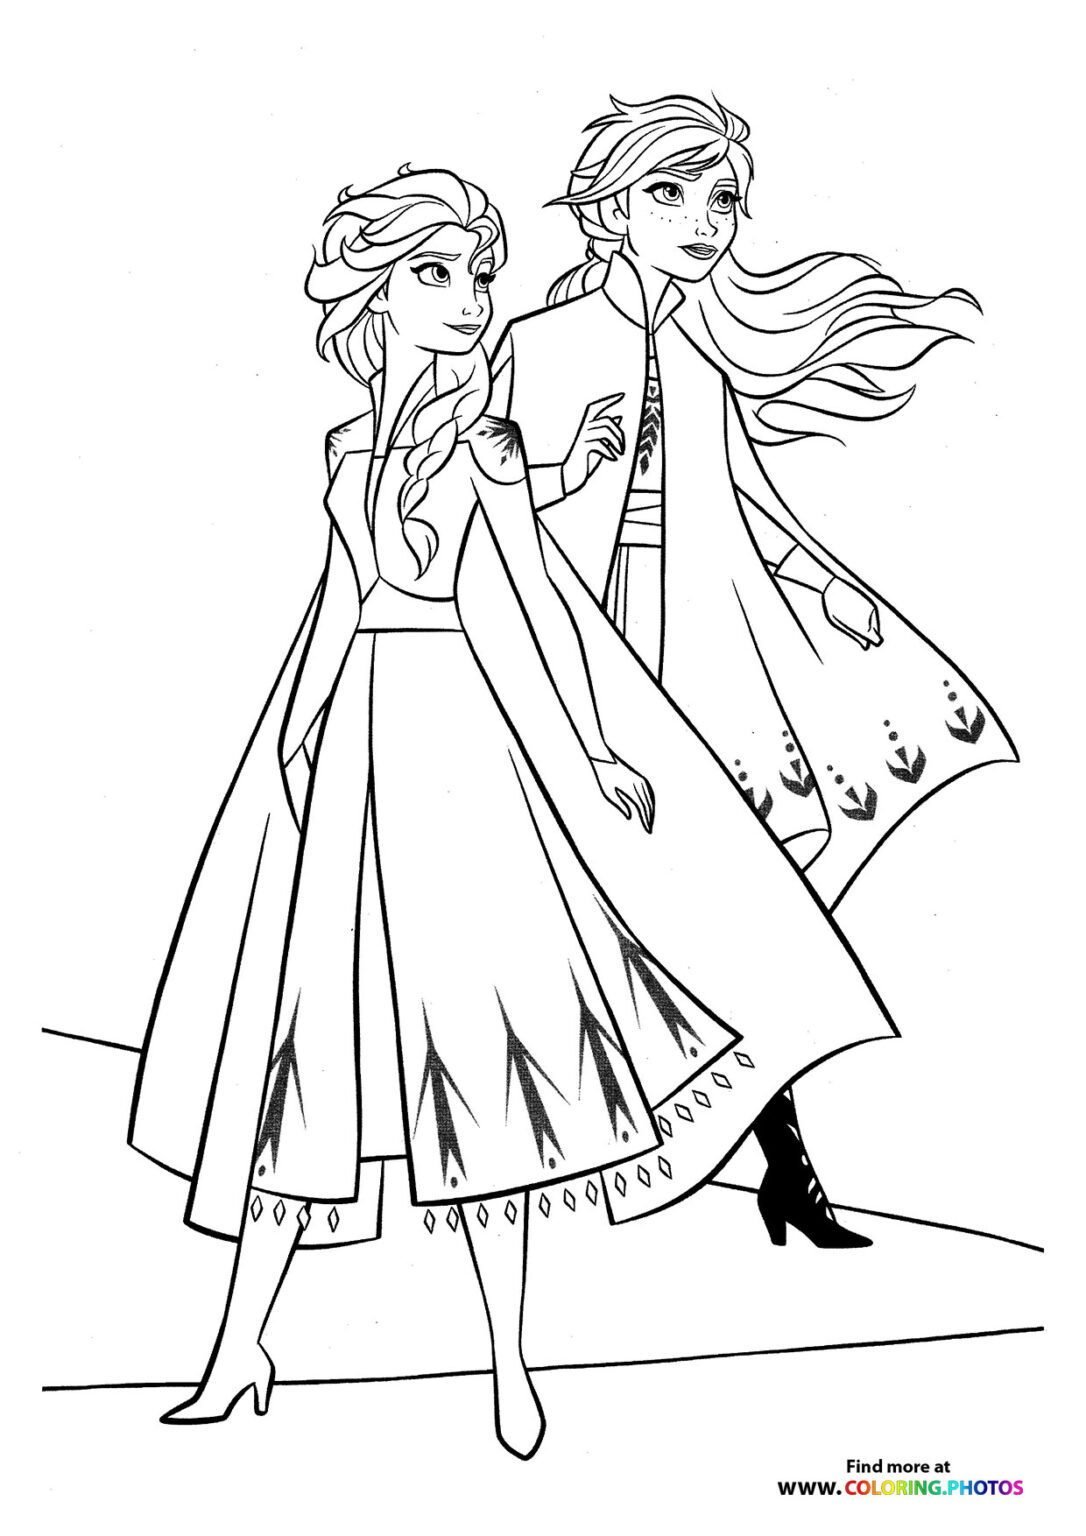 Frozen Elsa - Coloring Pages for kids | Easy Print or Download